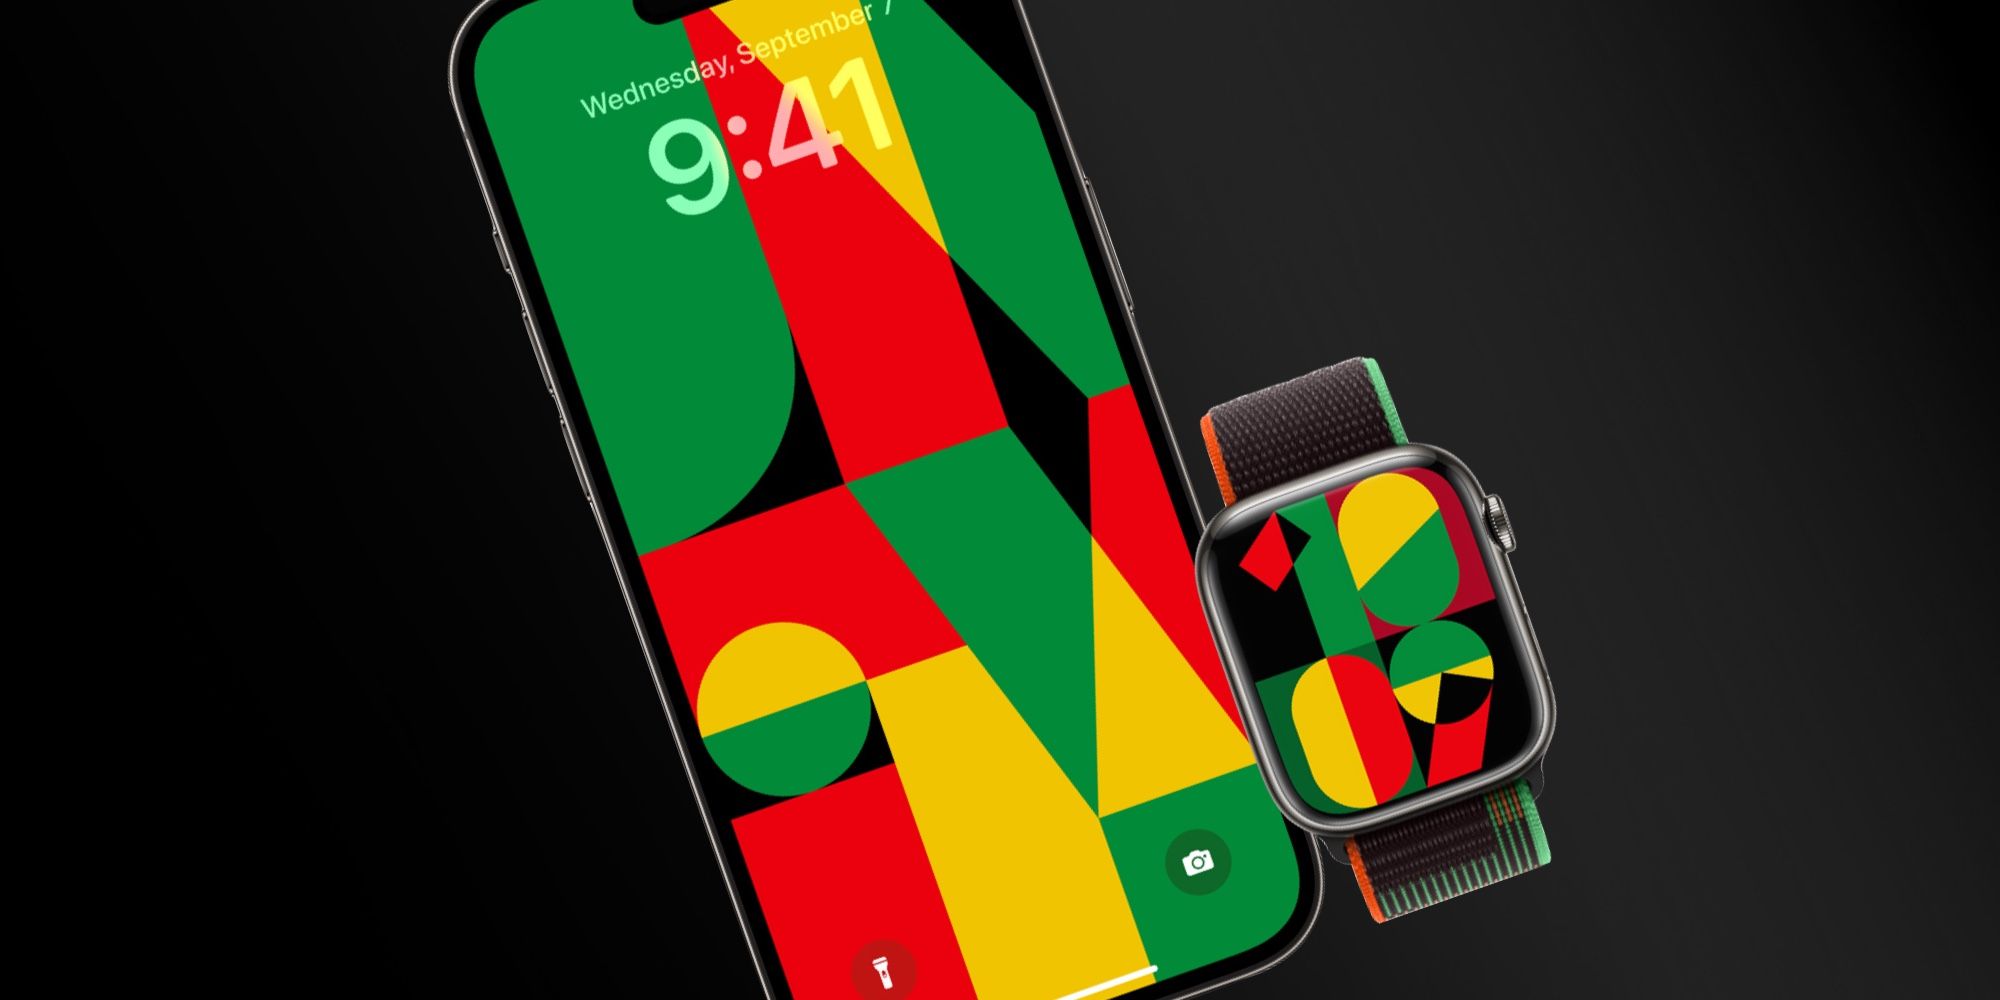 How To Get The Unity Mosaic Apple Watch Face & Unity iPhone Wallpaper